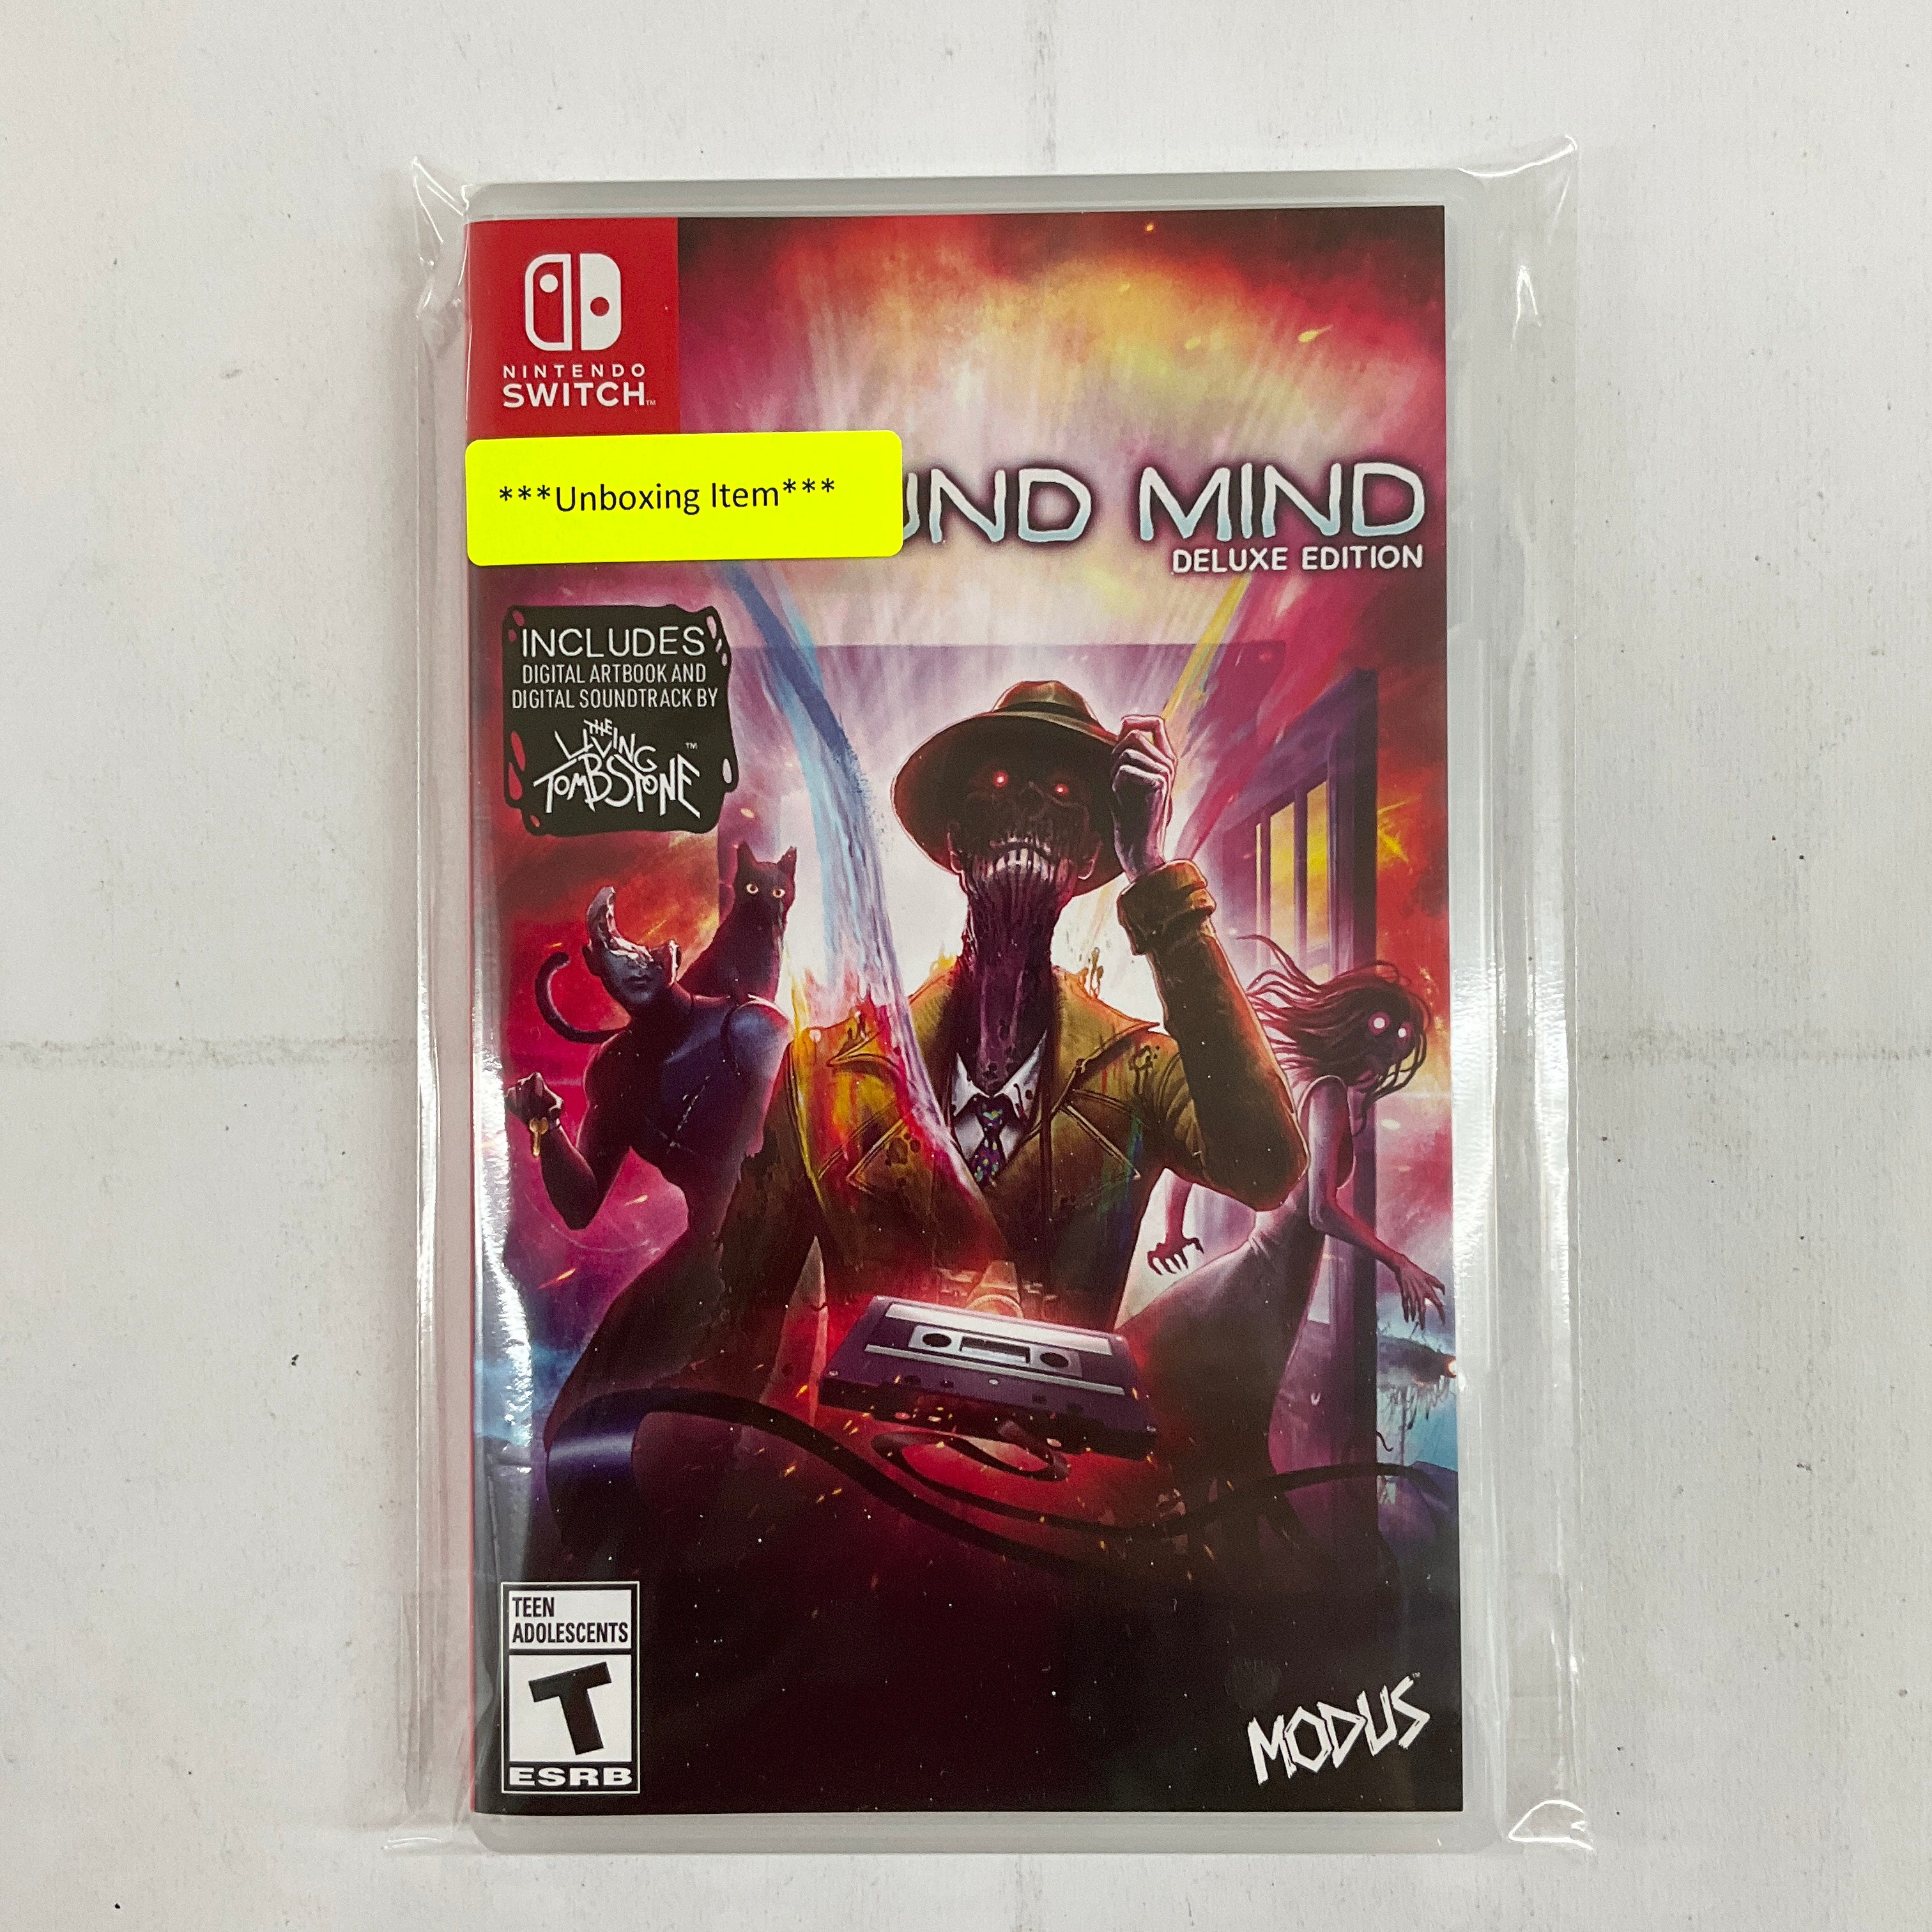 In Sound Mind: Deluxe Edition - (NSW) Nintendo Switch [UNBOXING] Video Games Maximum Games   